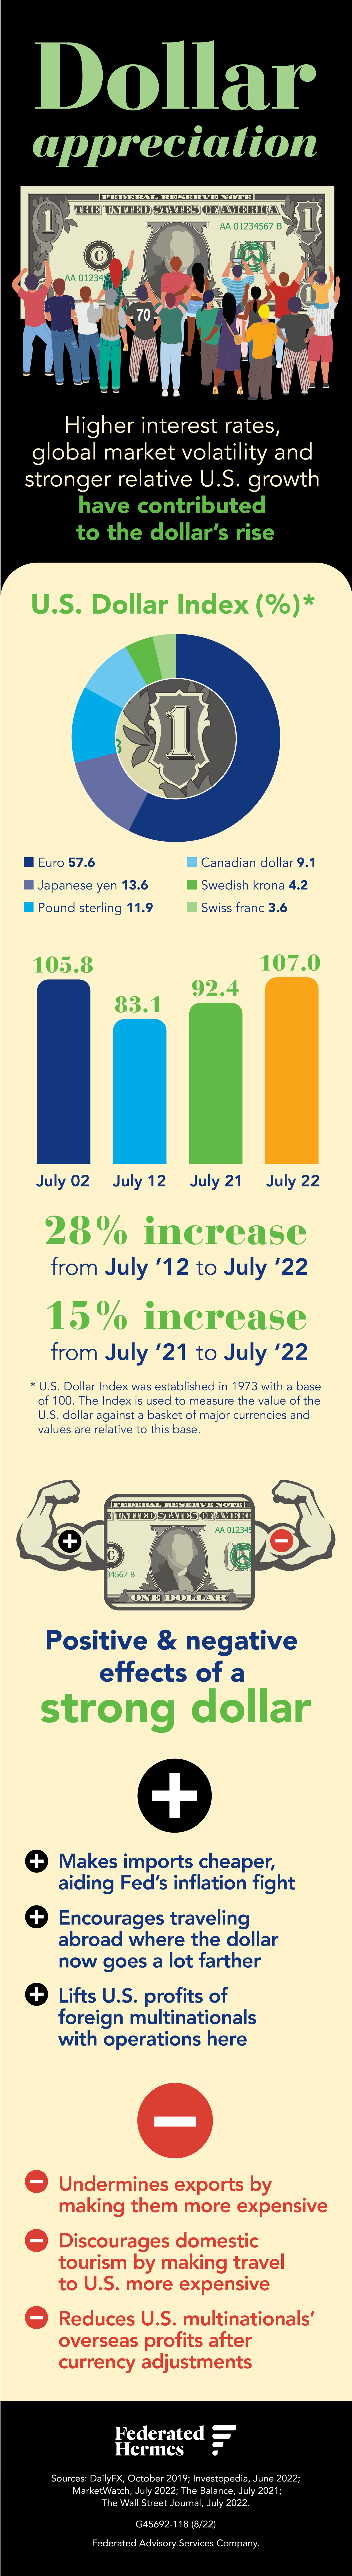 Dollar Appreciation Higher interest rates, global market volatility and stronger relative growth in the United States have contributed to the dollar’s rise. The U.S. Dollar Index was established in 1973 with a base of 100. The Index is used to measure the value of the U.S. dollar against a basket of major currencies and values are relative to this base. U.S. Dollar Index (%) The U.S. Dollar as compared to the Euro 57.6%, Japanese yen 13.6%, Pound sterling 11.9%, Canadian dollar 9.1%, Swedish krona 4.2% and Swiss franc 3.6%. The U.S. Dollar index was 105.8 in July 2002, 83.1 in July 2012, 92.4 in July 2021, 107.0 in July 2022. This marks a 28% increase from July 2012 to July 2022 and a 15% increase from July 2021 to July 2022. There are positive & negative effects of a strong dollar. The positives include that it makes imports cheaper aiding Fed’s infl¬ation fight, encourages traveling abroad where the dollar now goes a lot farther and lifts U.S. profits of foreign multinationals with operations here. The negatives include that it undermines exports by making them more expensive, discourages domestic tourism by making travel to U.S. more expensive and reduces U.S. multinationals’ overseas profits after currency adjustments. Information Sources: DailyFX, October 2019; Investopedia, June 2022; MarketWatch, July 2022; The Balance, July 2021; The Wall Street Journal, July 2022. 